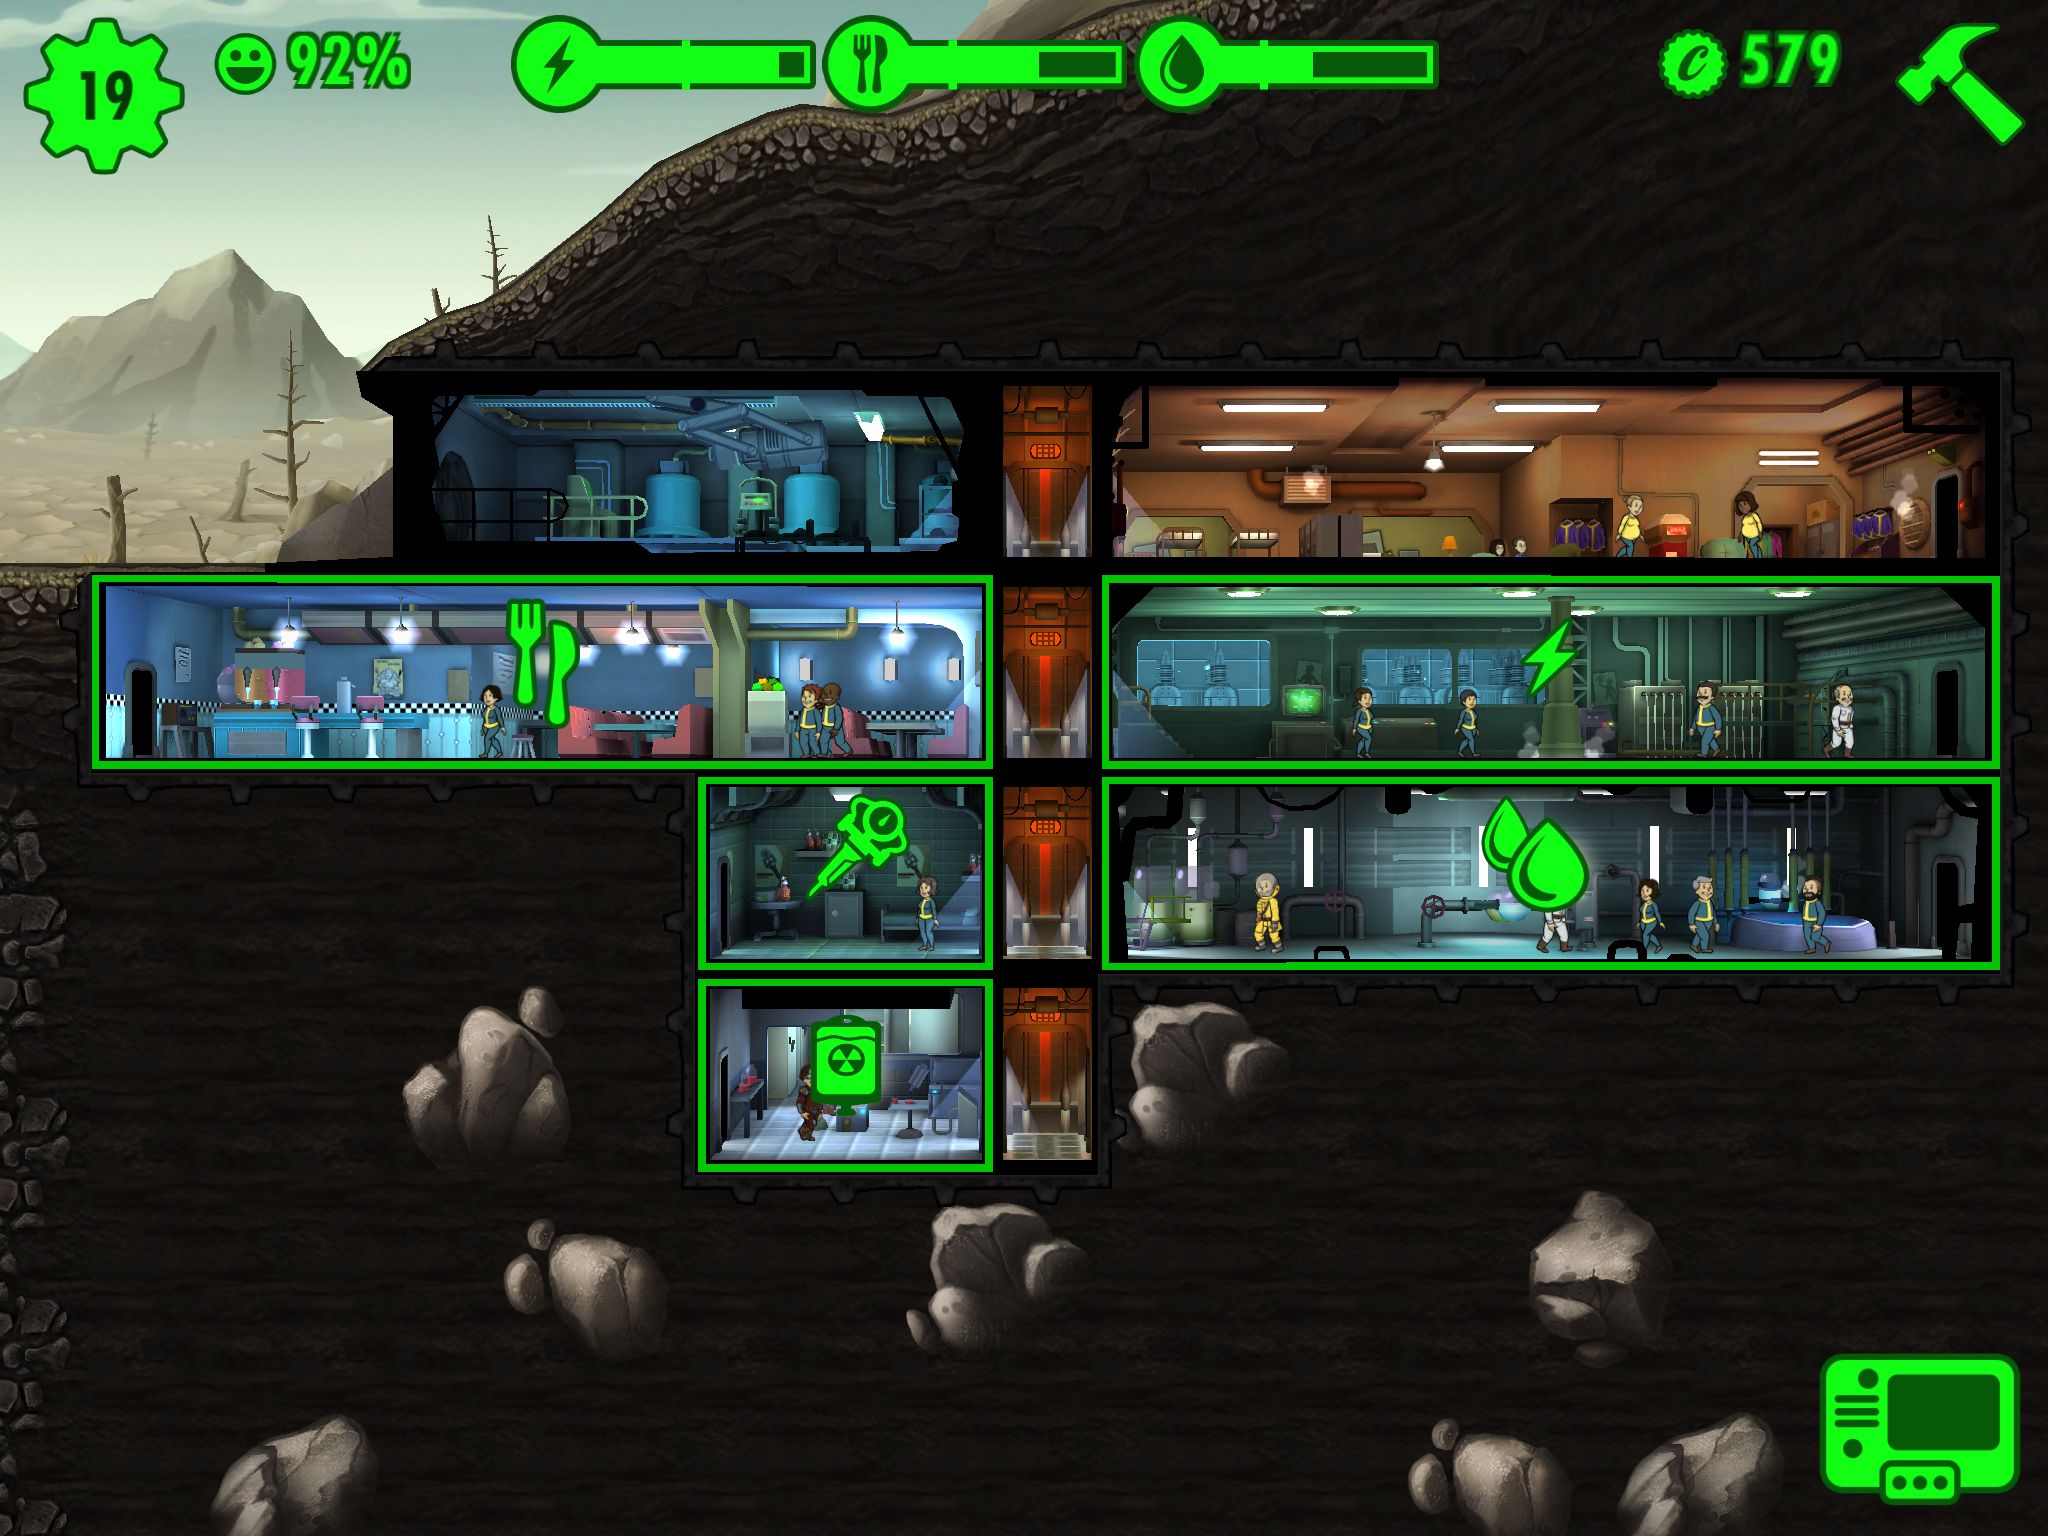 Fallout Shelter Game Guide